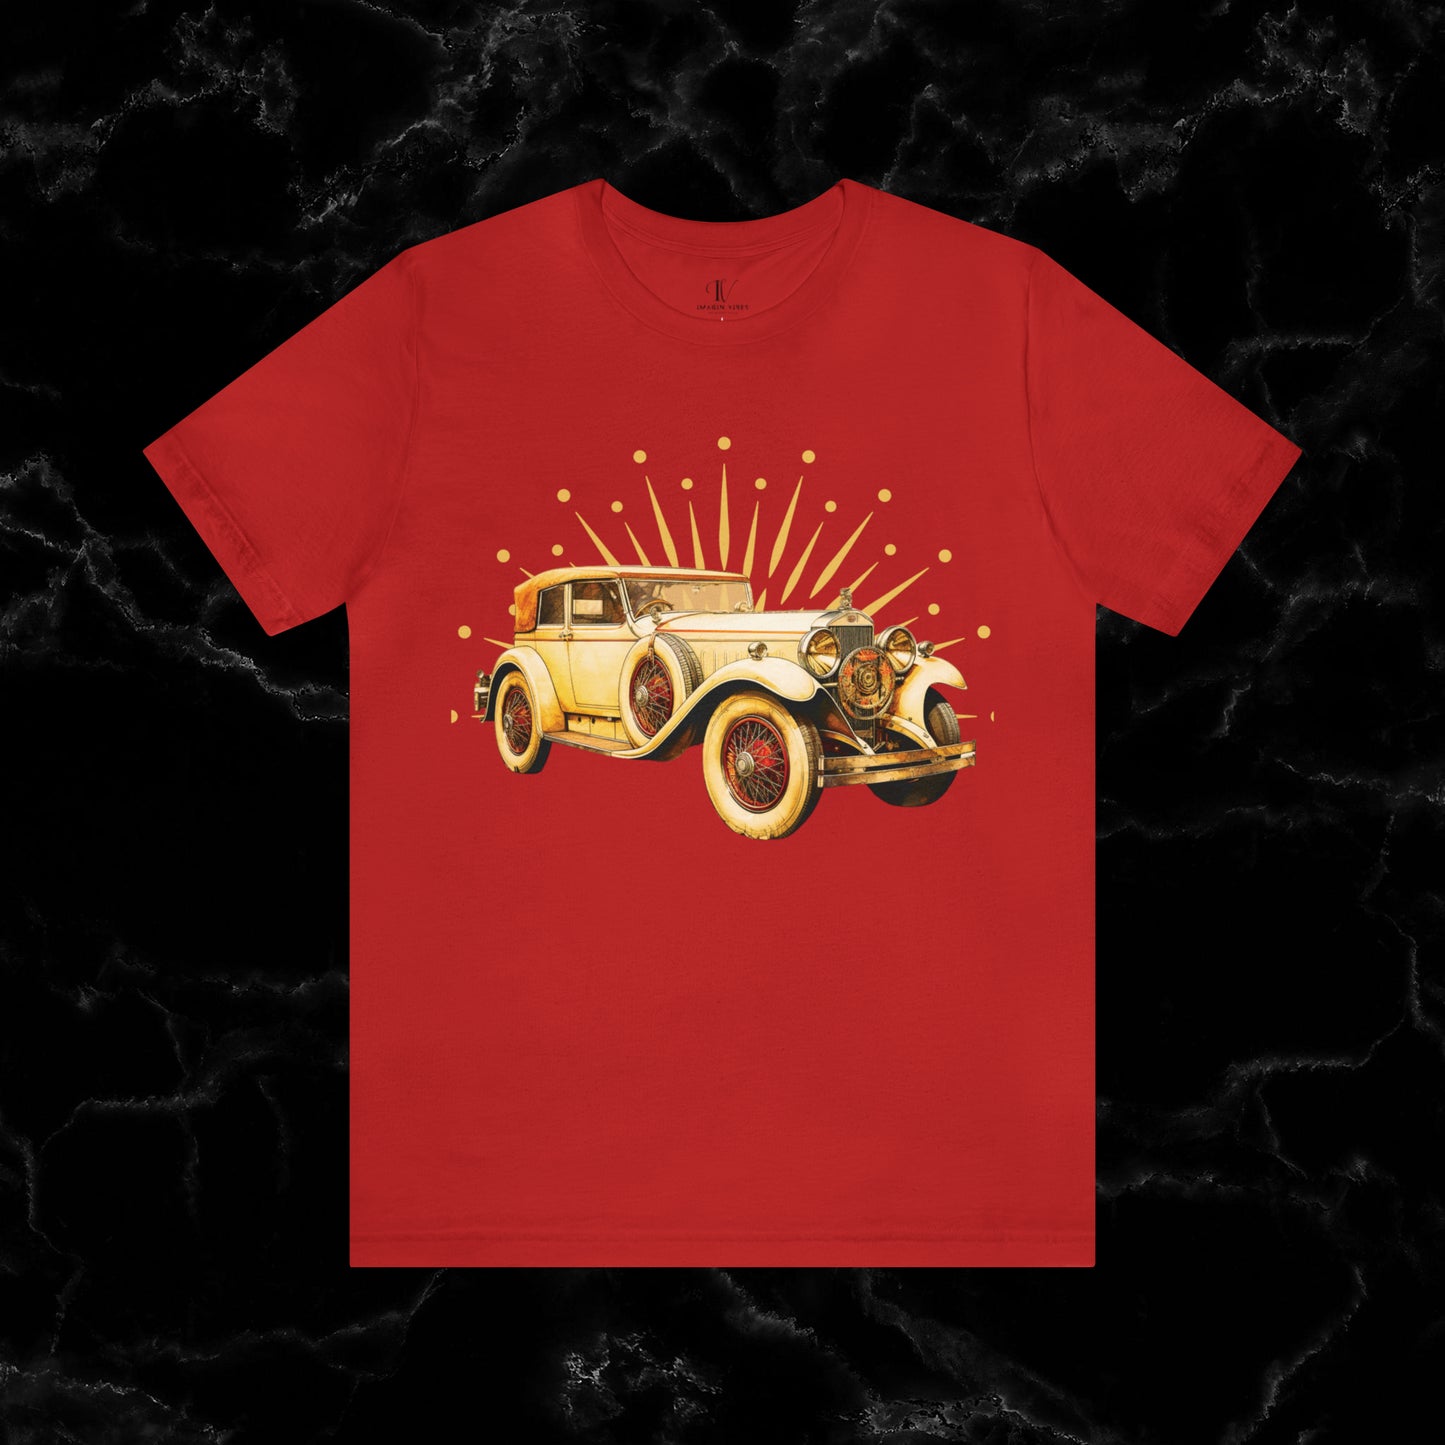 Vintage Car Enthusiast T-Shirt with Classic Wheels and Timeless Appeal T-Shirt Red S 